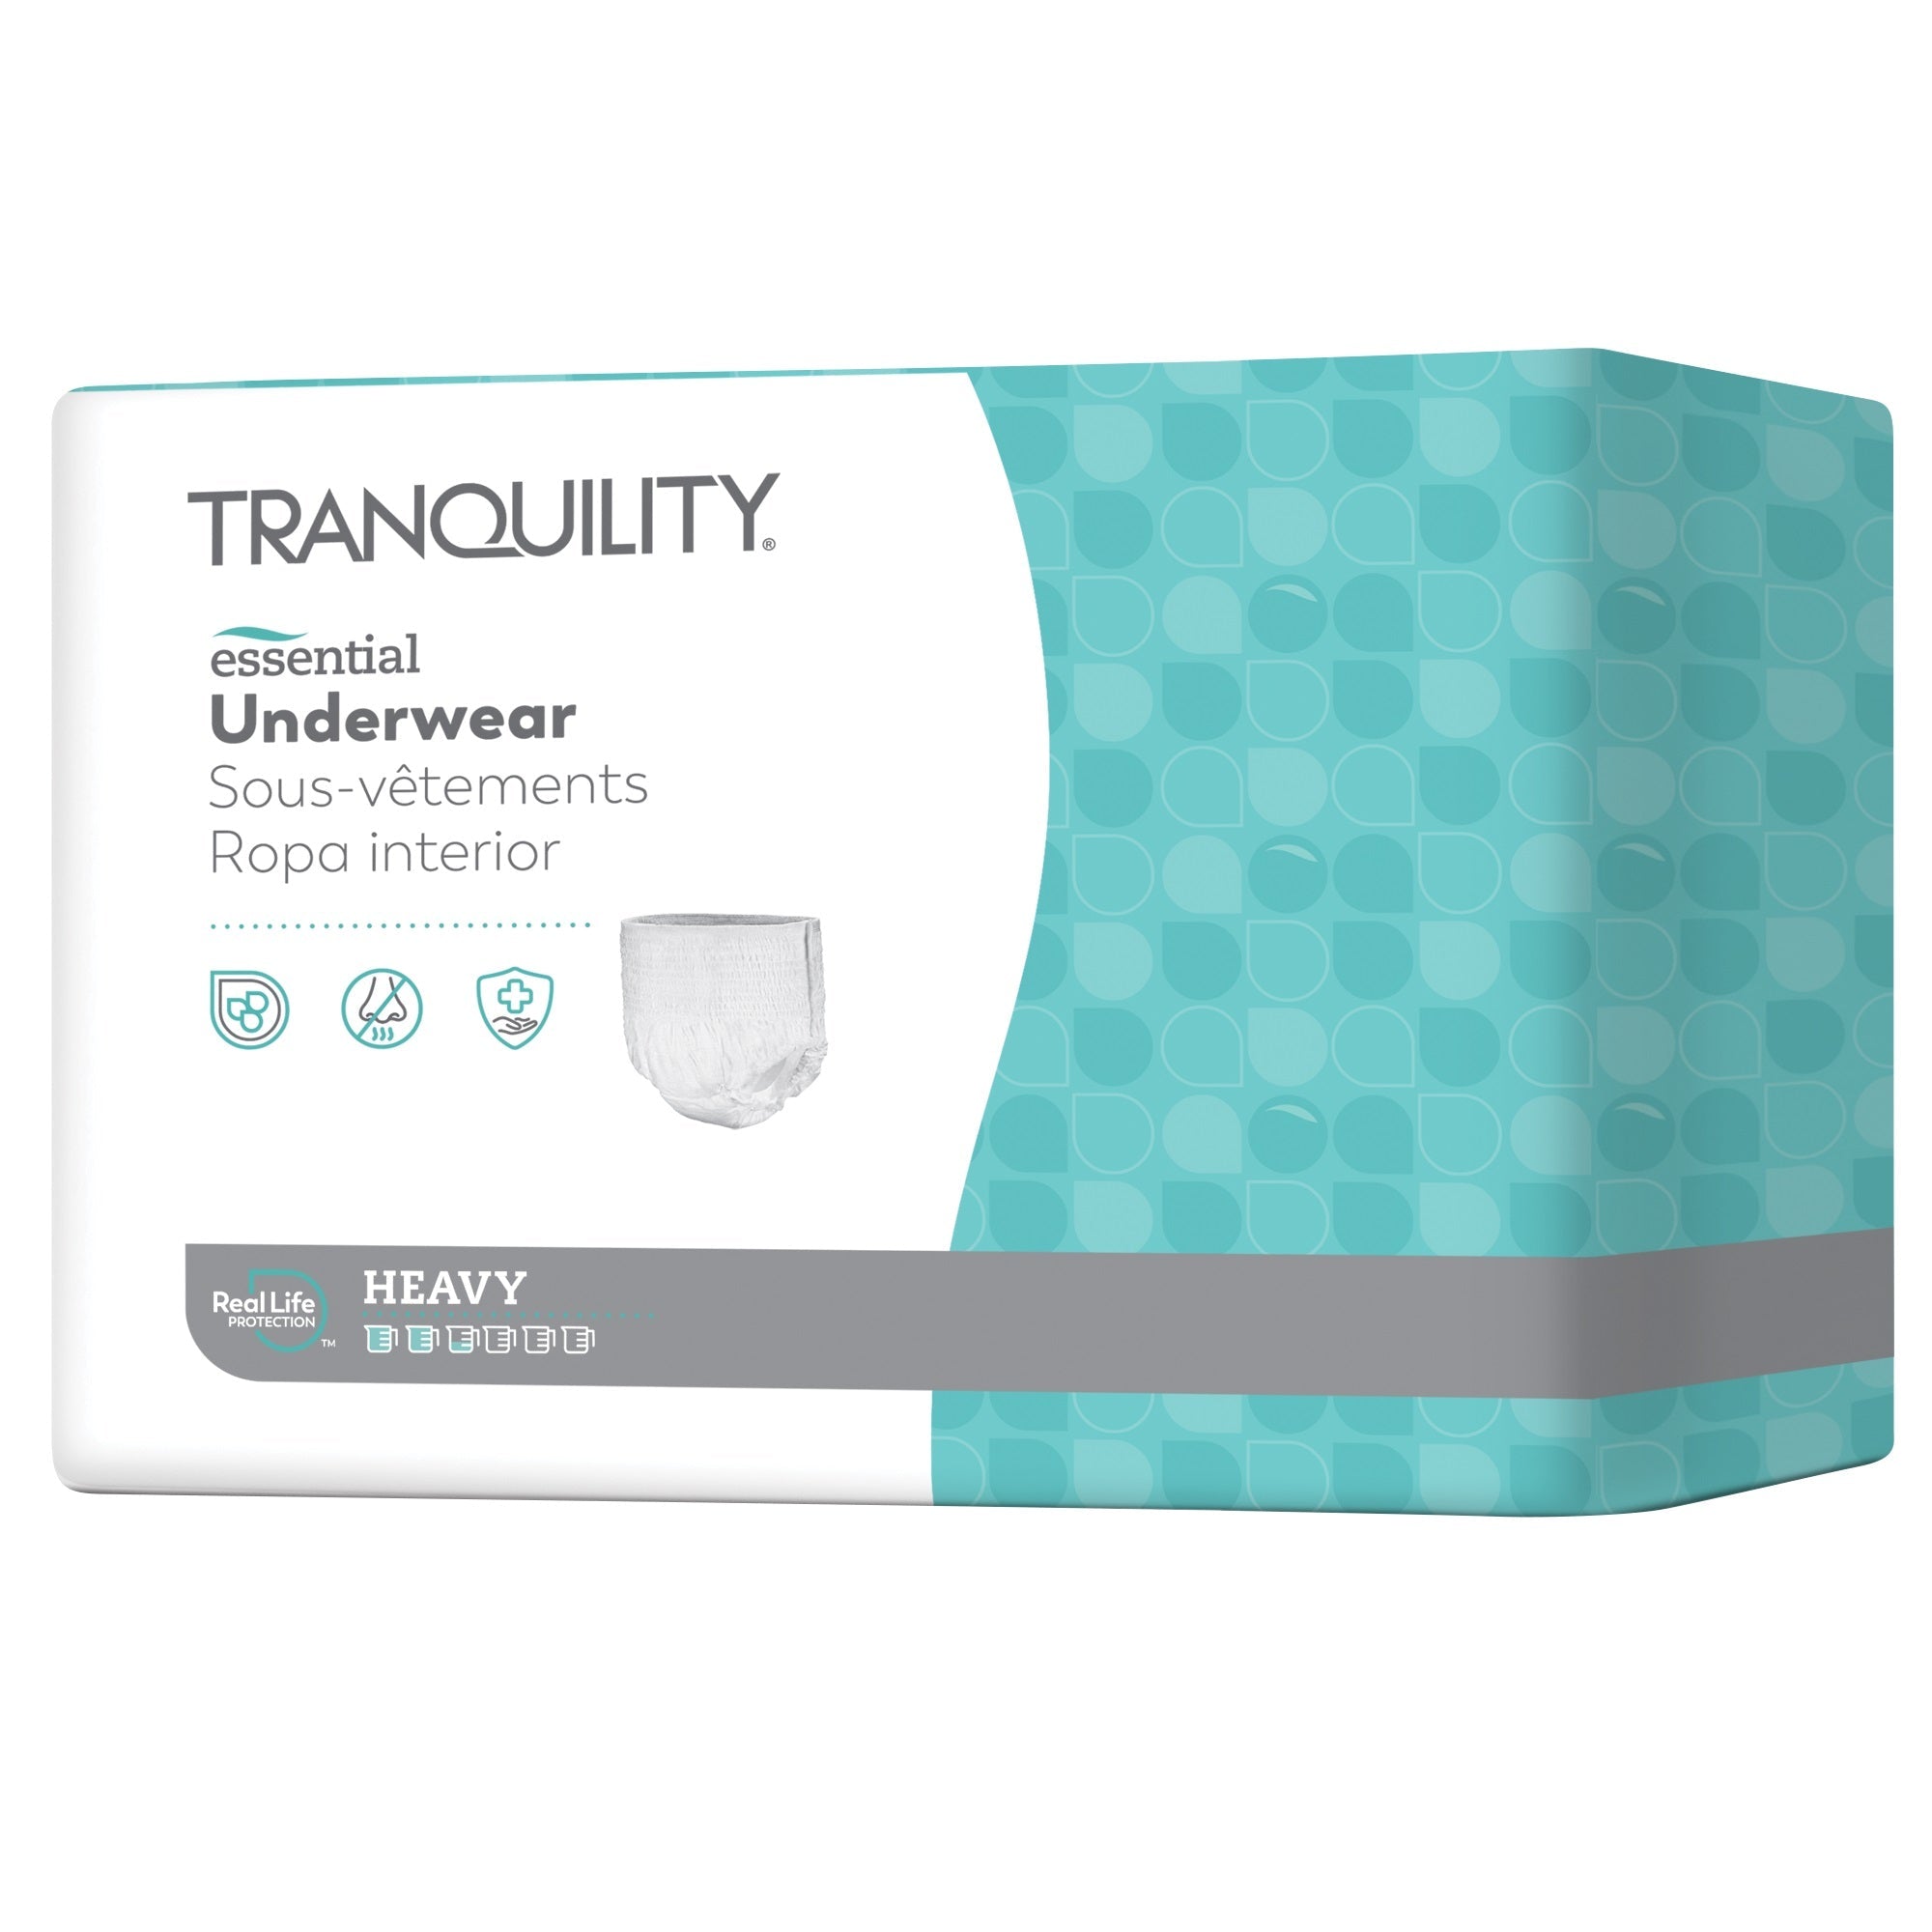 CA/72 - Tranquility® Select® Disposable Absorbent Underwear, 19 oz Fluid Capacity, Large (44" to 54" Waist/Hip, 170 to 210 lb) - Possible sub for PU2650 - Best Buy Medical Supplies